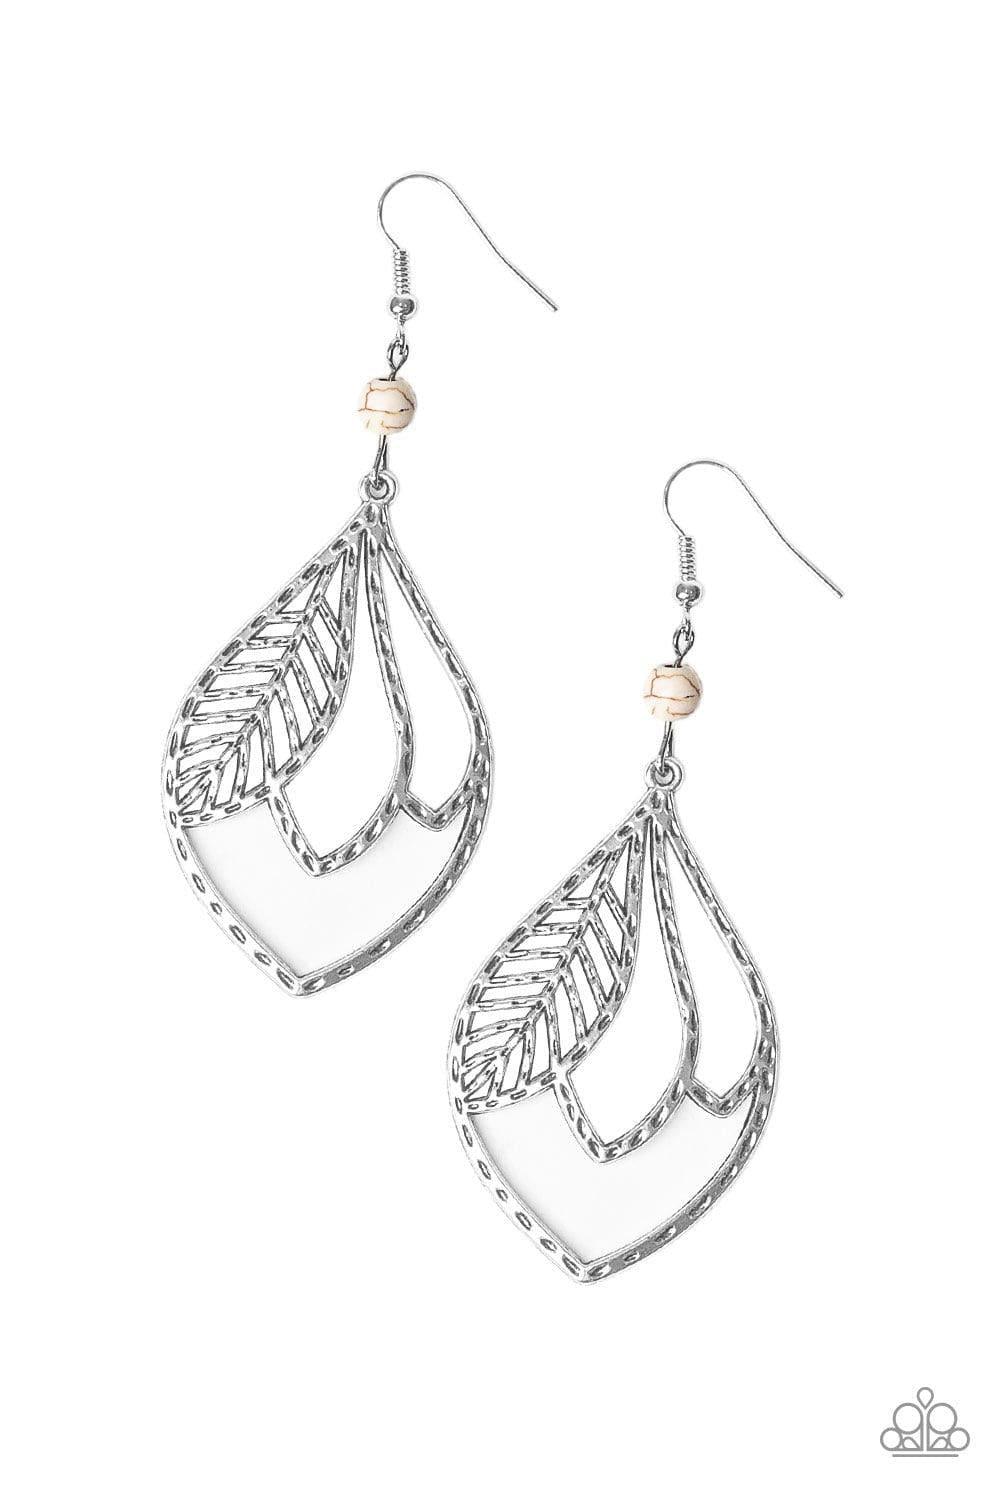 Paparazzi Accessories - Absolutely Airborne - White Feather Earrings - Bling by JessieK